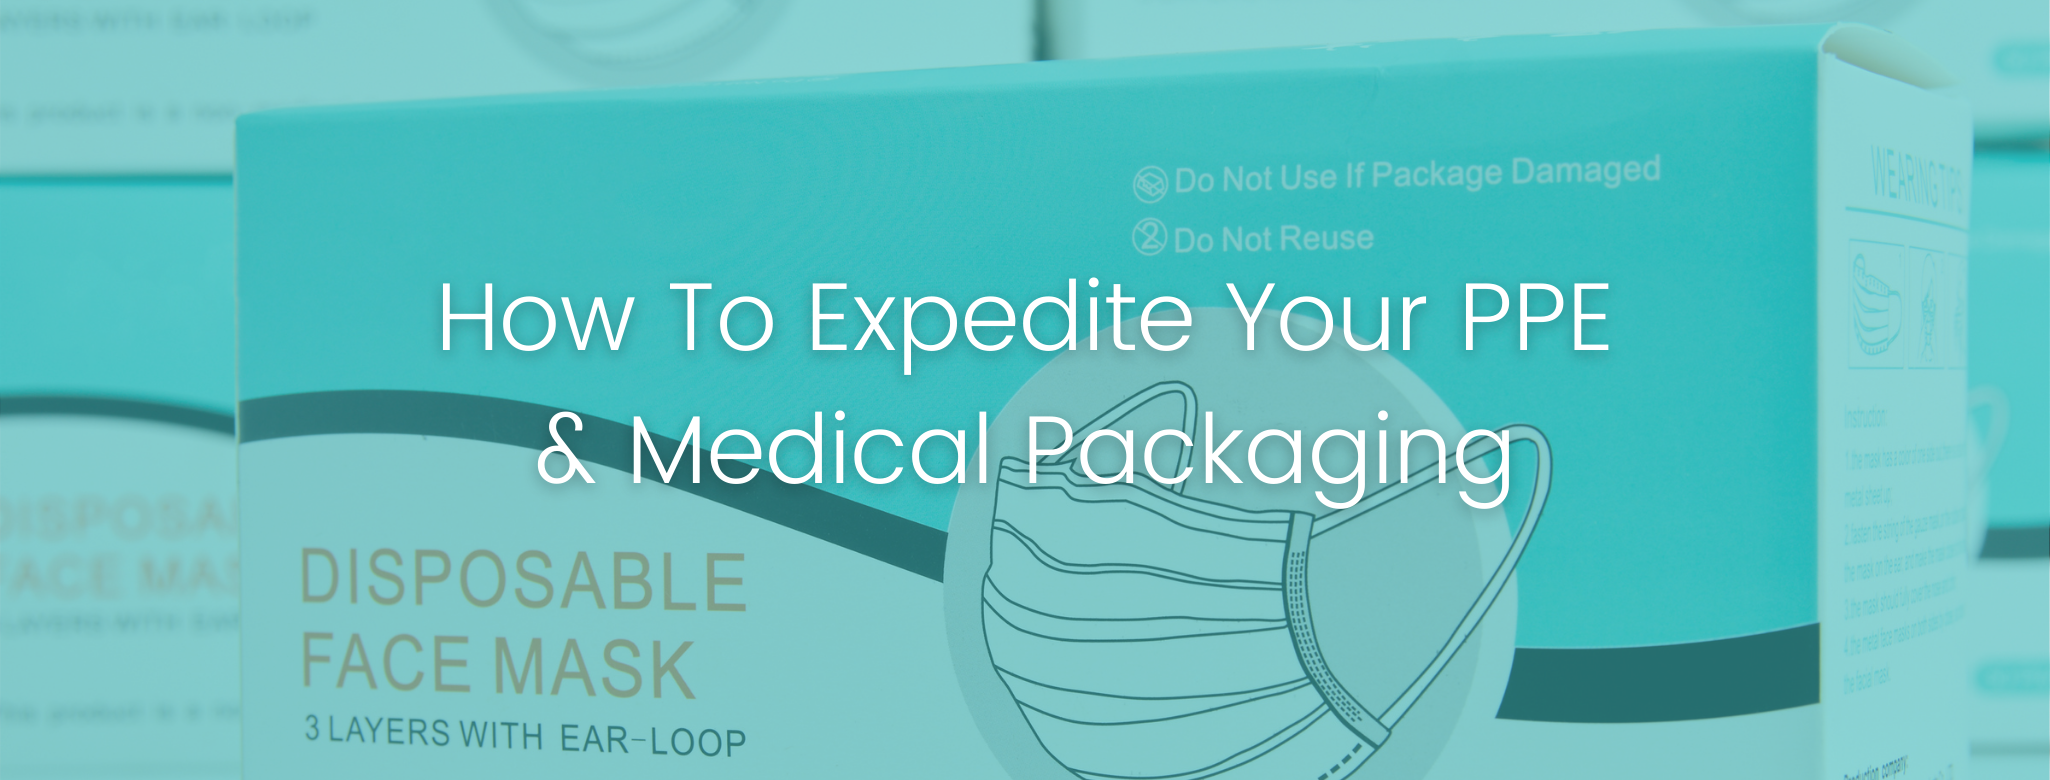 How To Expedite Your PPE & Medical Packaging